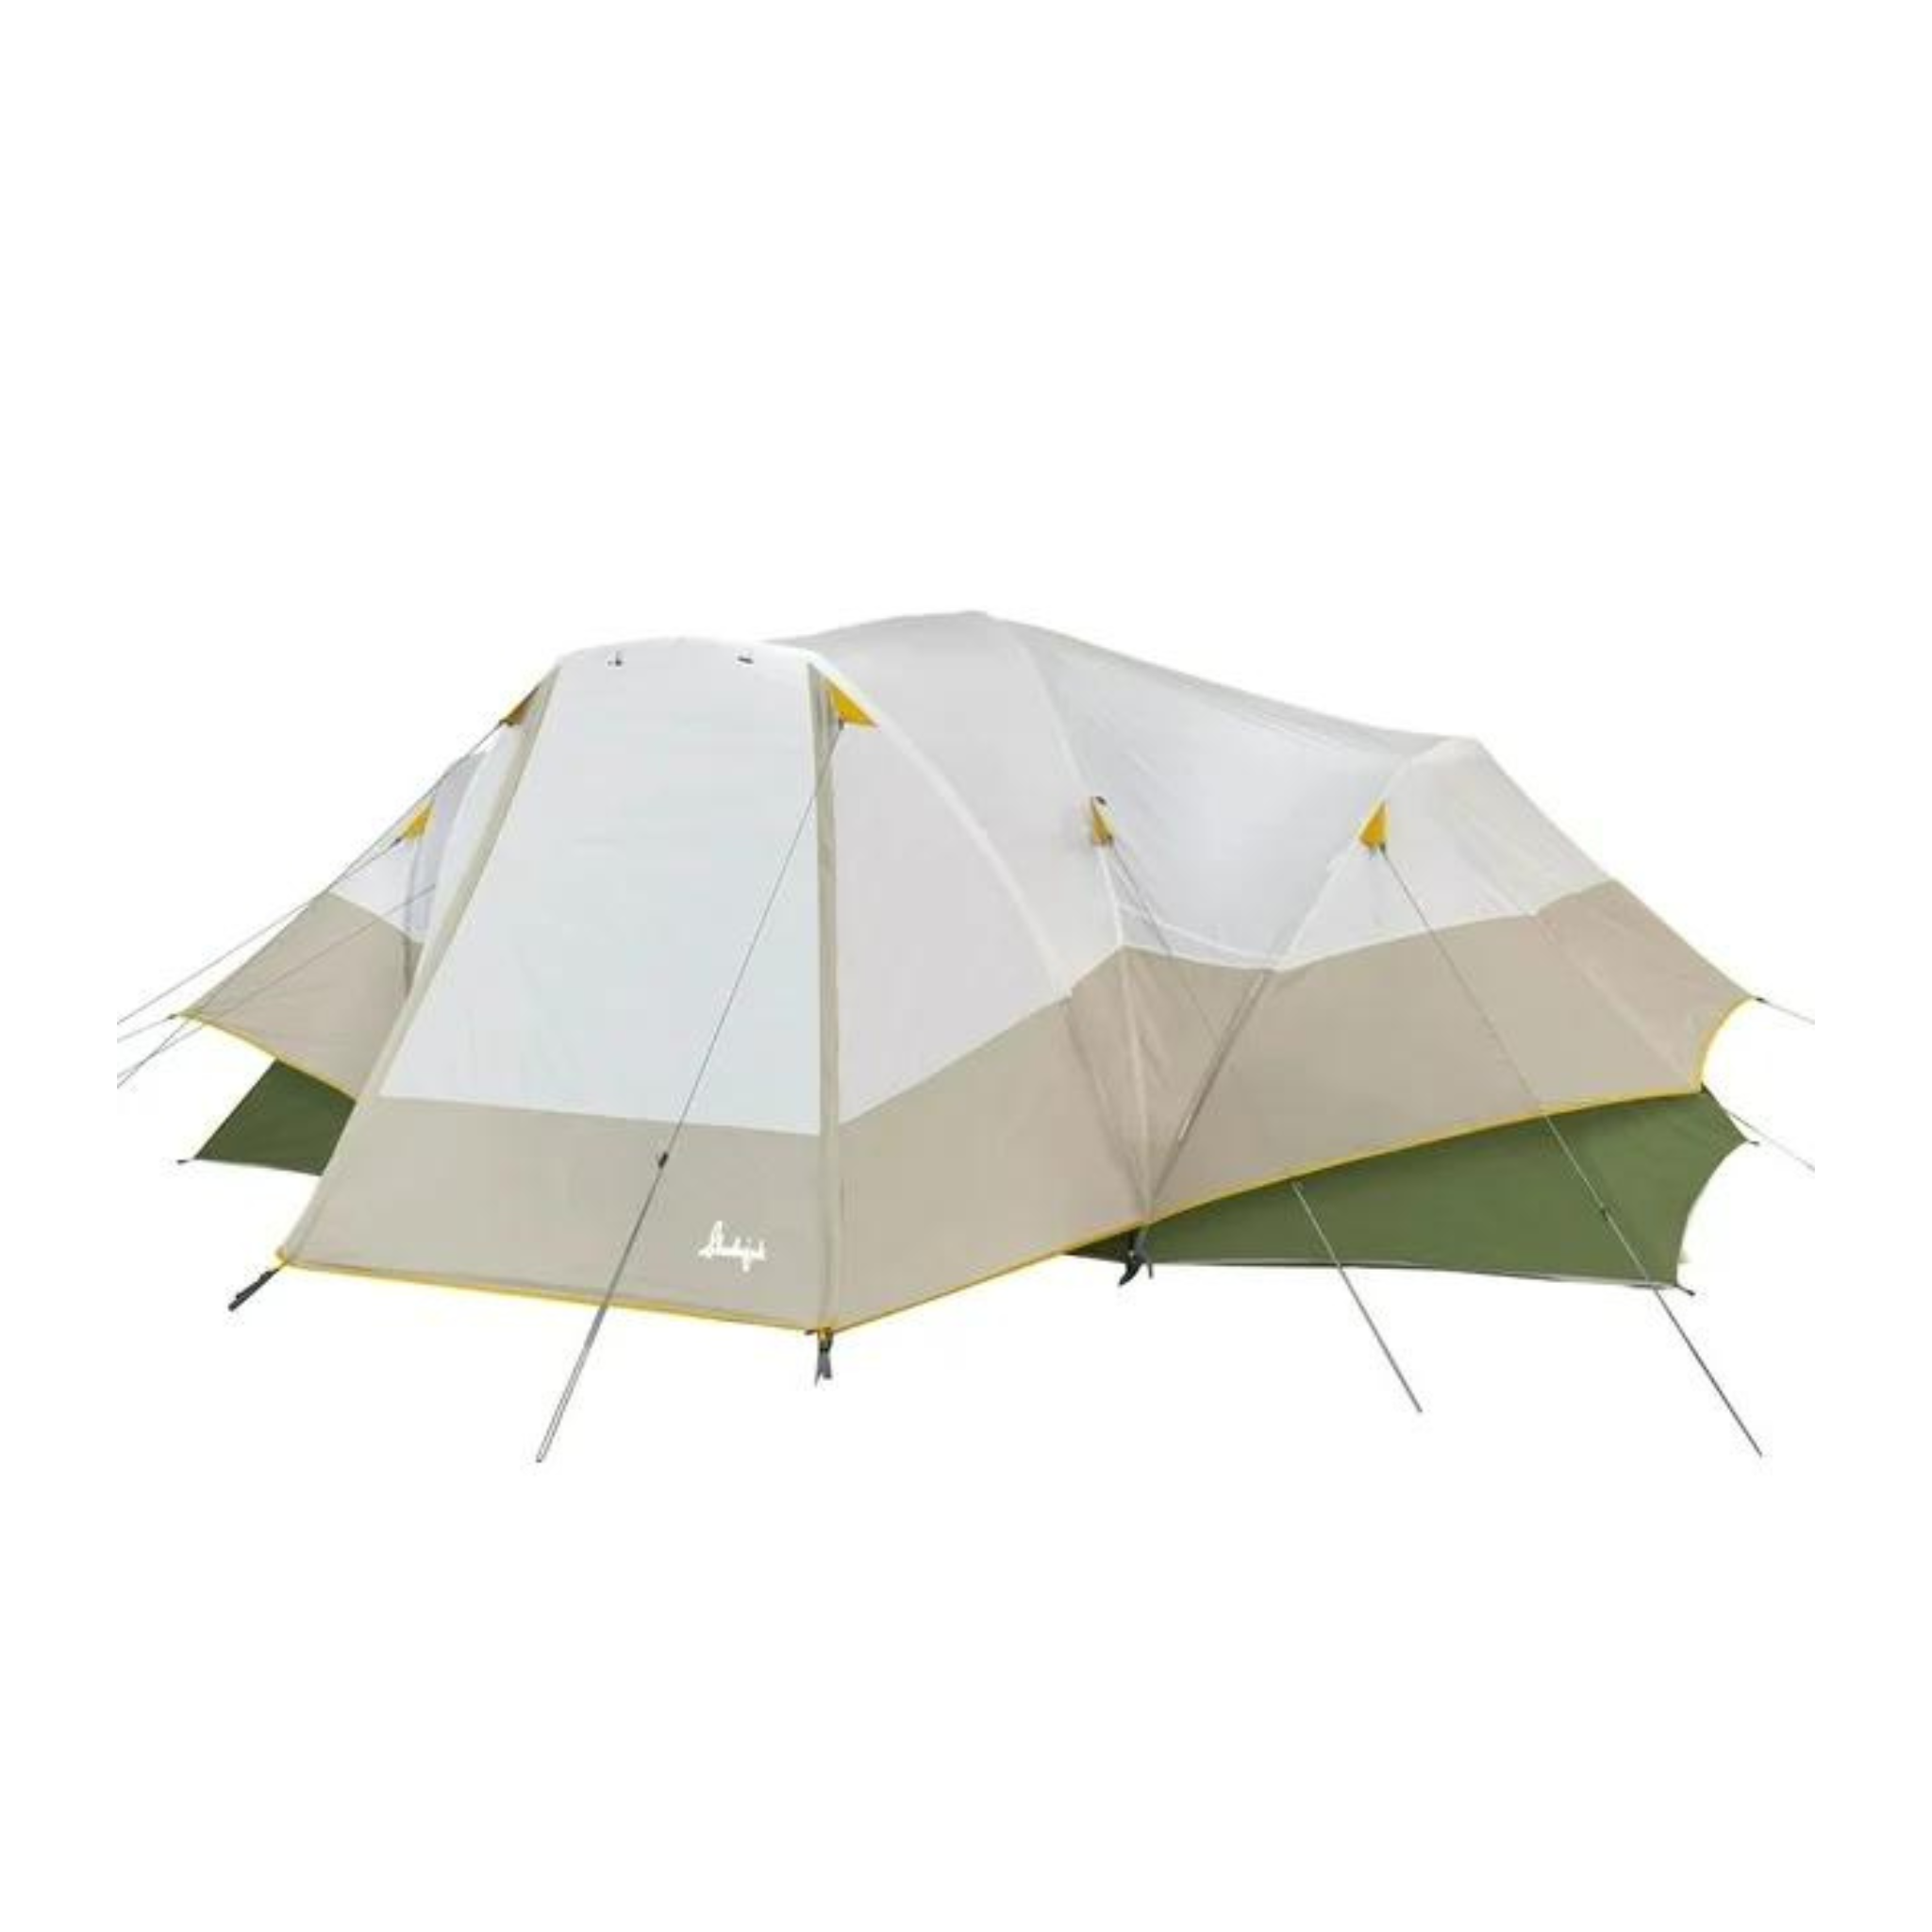 8 Or 10 Person Tents On Sale